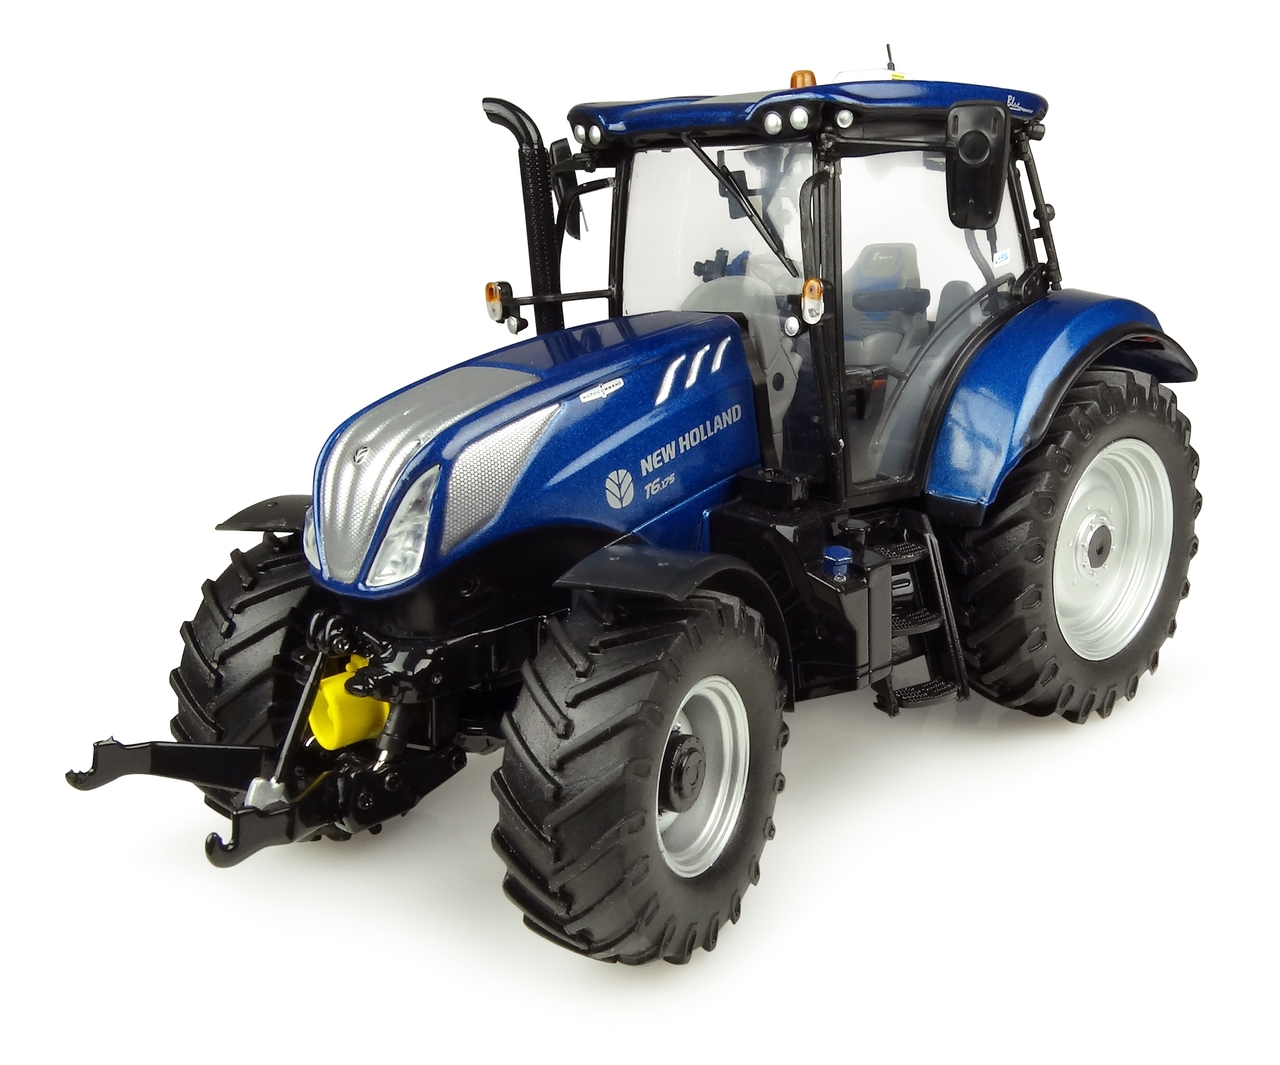 New Holland T6.175 "blue Power" Tractor 1/32 Diecast Model By Universal Hobbies